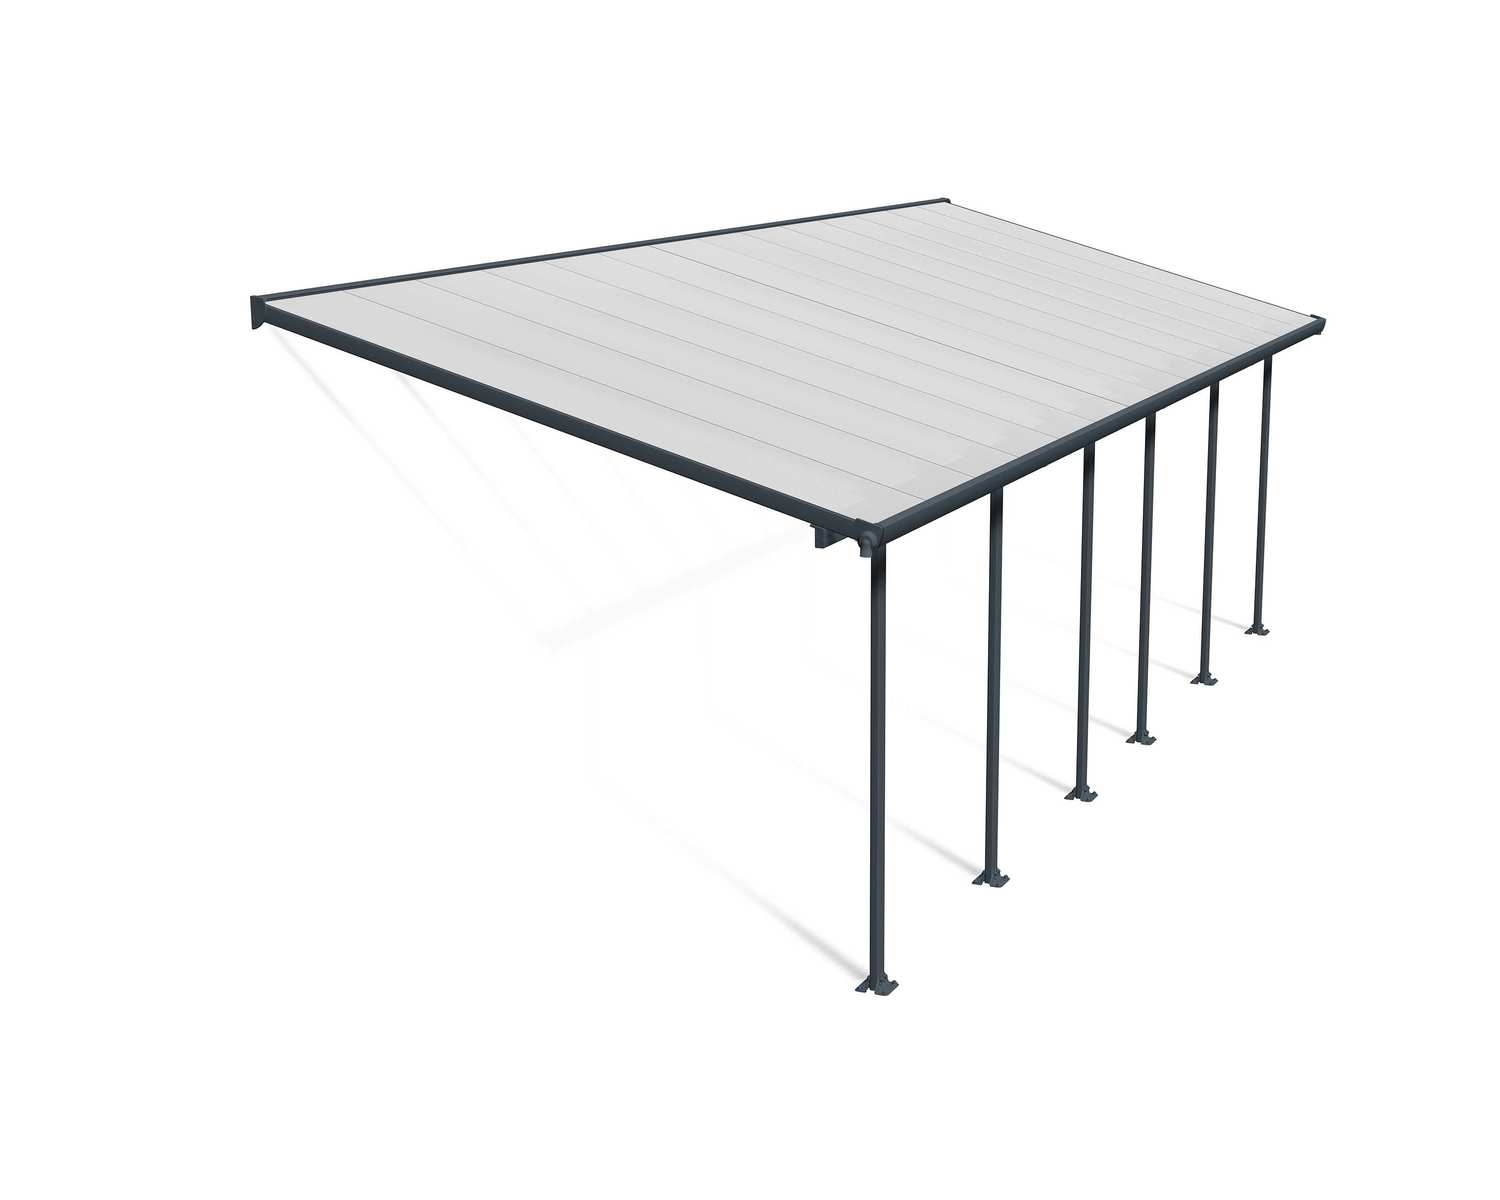 Feria 10 ft. x 28 ft. Grey Aluminium Patio Cover With 6 Posts, Clear Twin-Wall Polycarbonate Roof Panels.